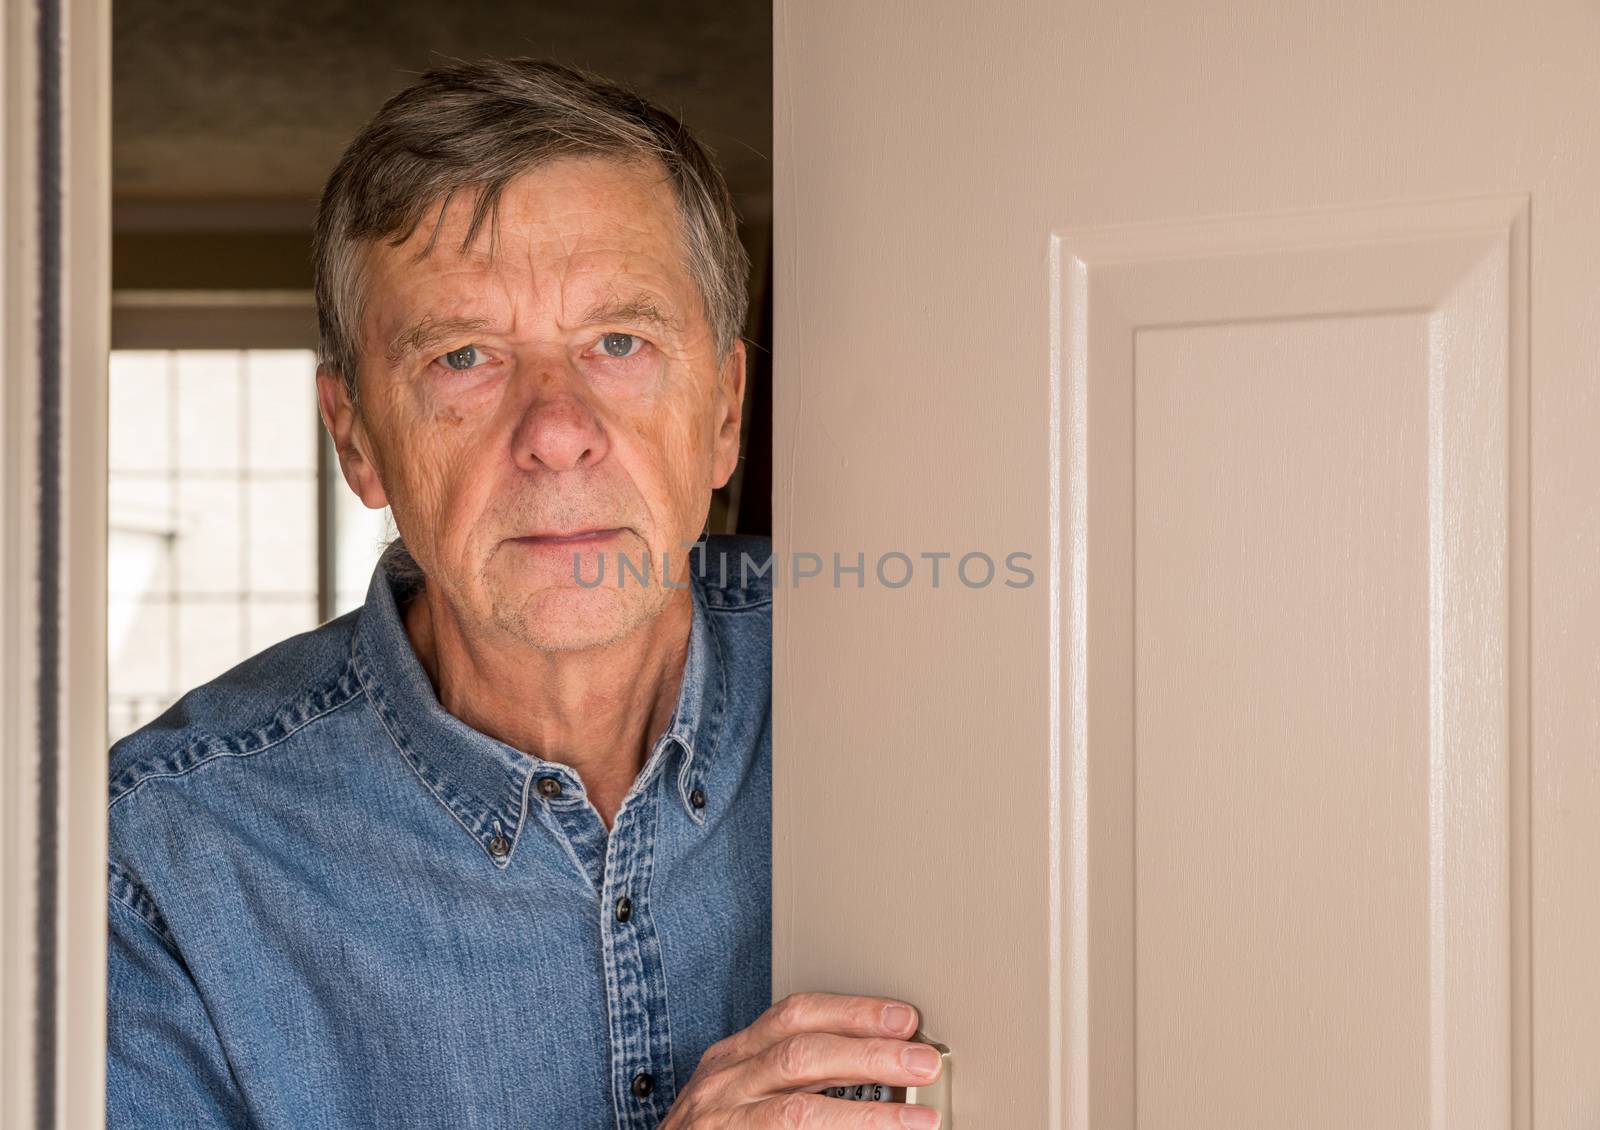 Senior man with looking worried at front door in case visitors bring coronavirus to his home